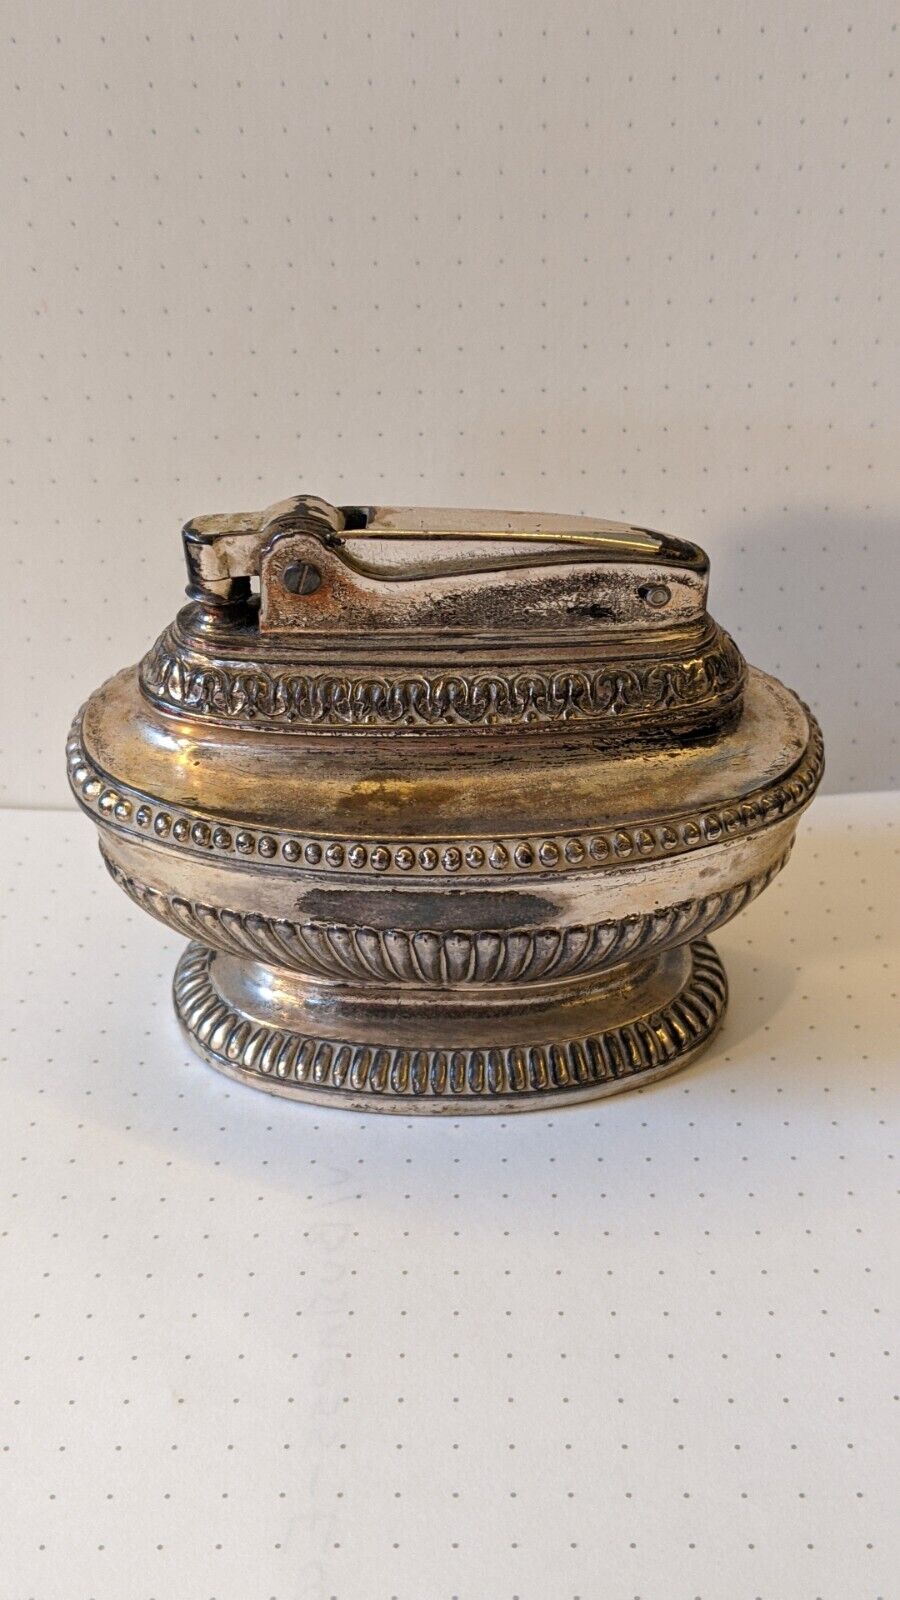 Ronson “Queen Anne” Table Lighter Vintage Antique Collectible Silver Plated